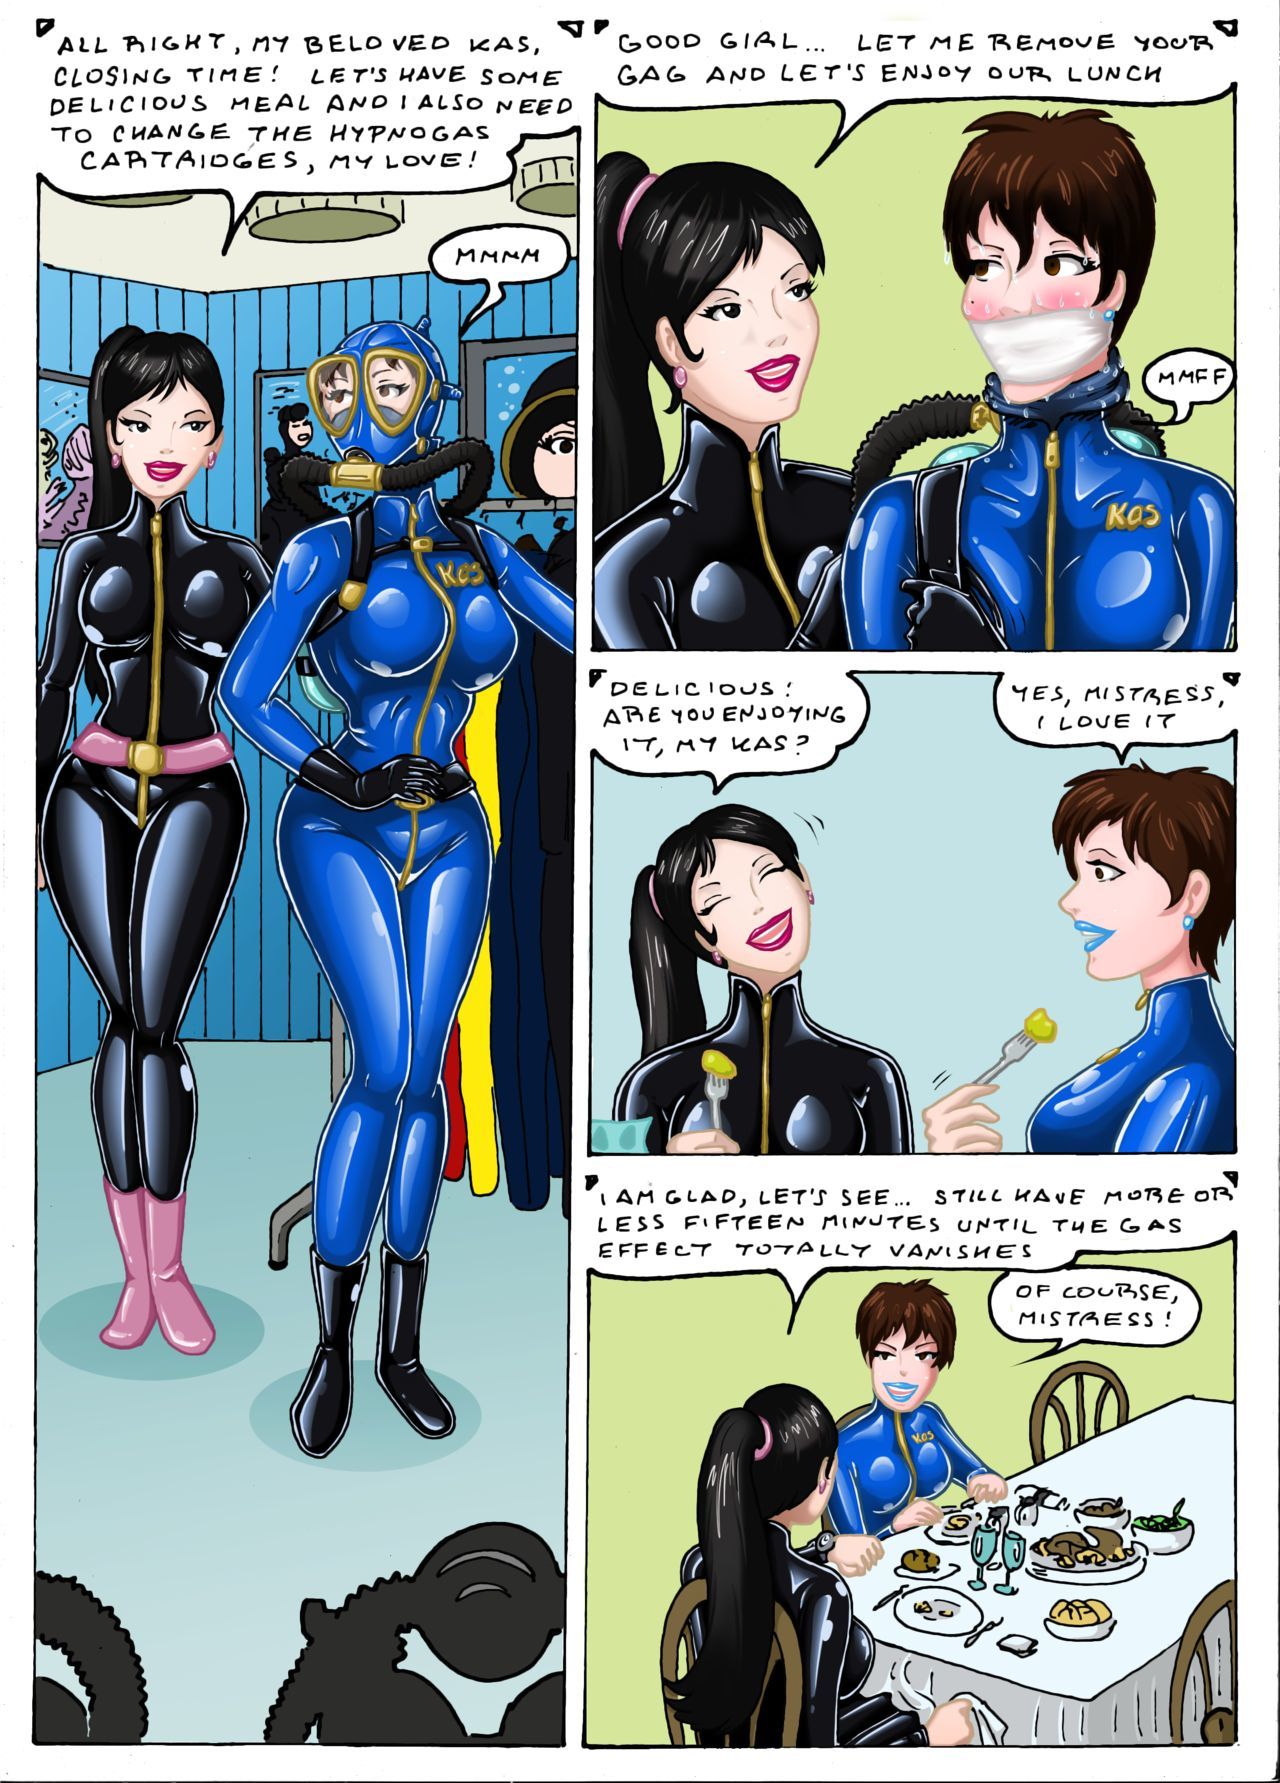 Get a Wetsuit Continued by Osvaldo Greco page 1